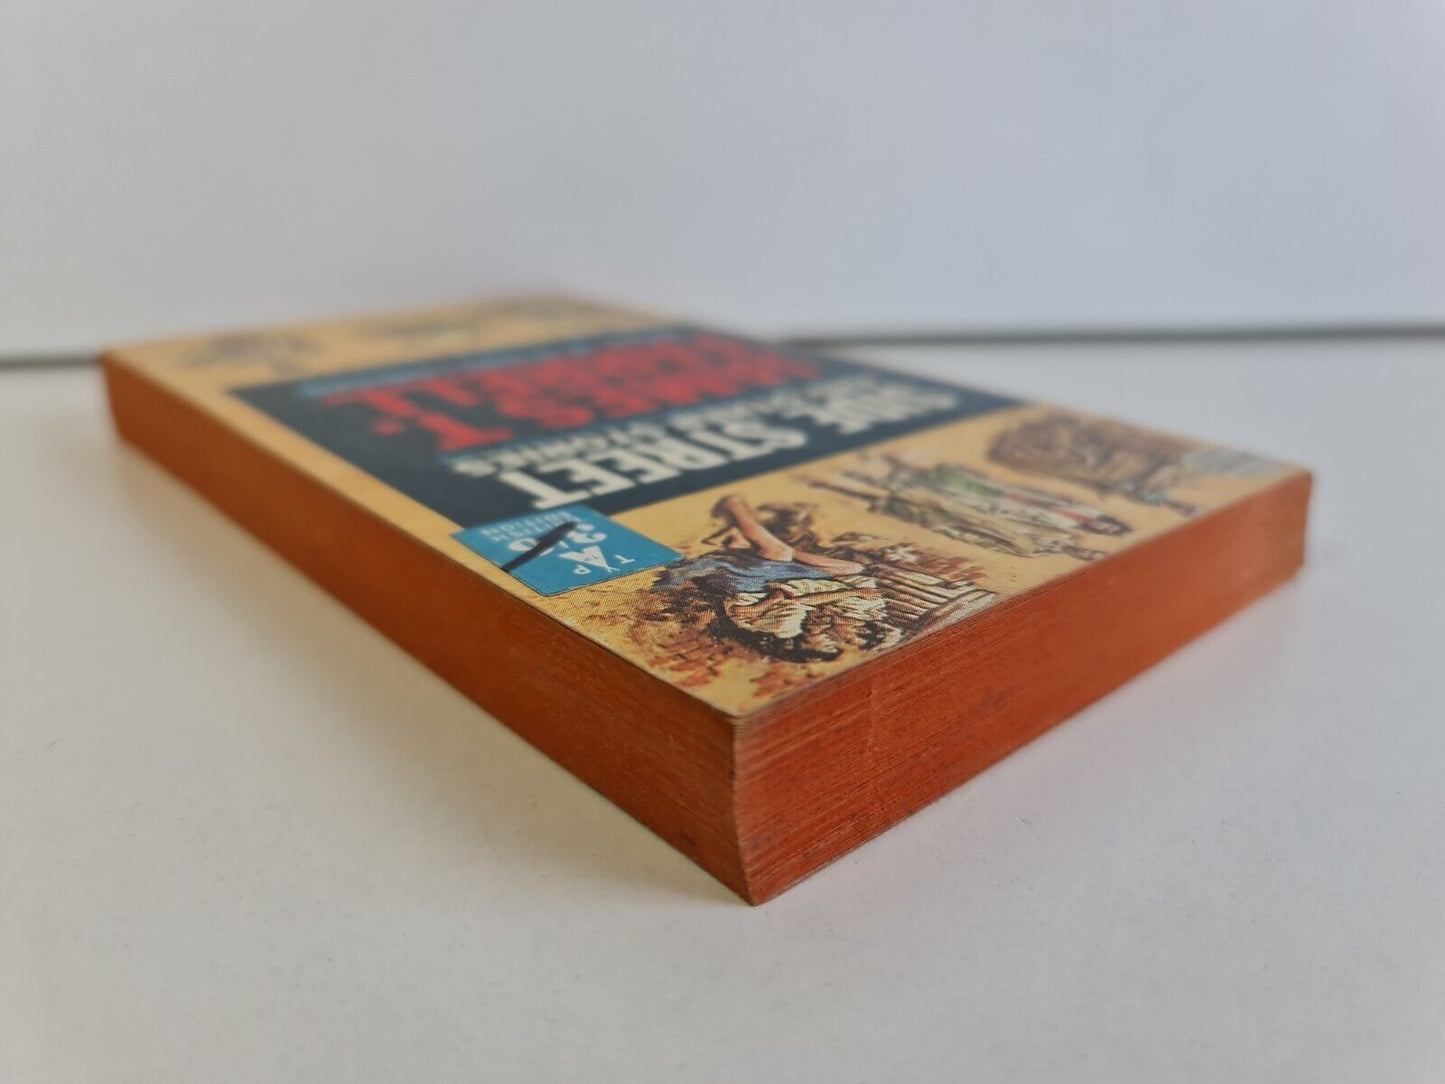 Side Street and Other Stories by James T Farrell (1961)